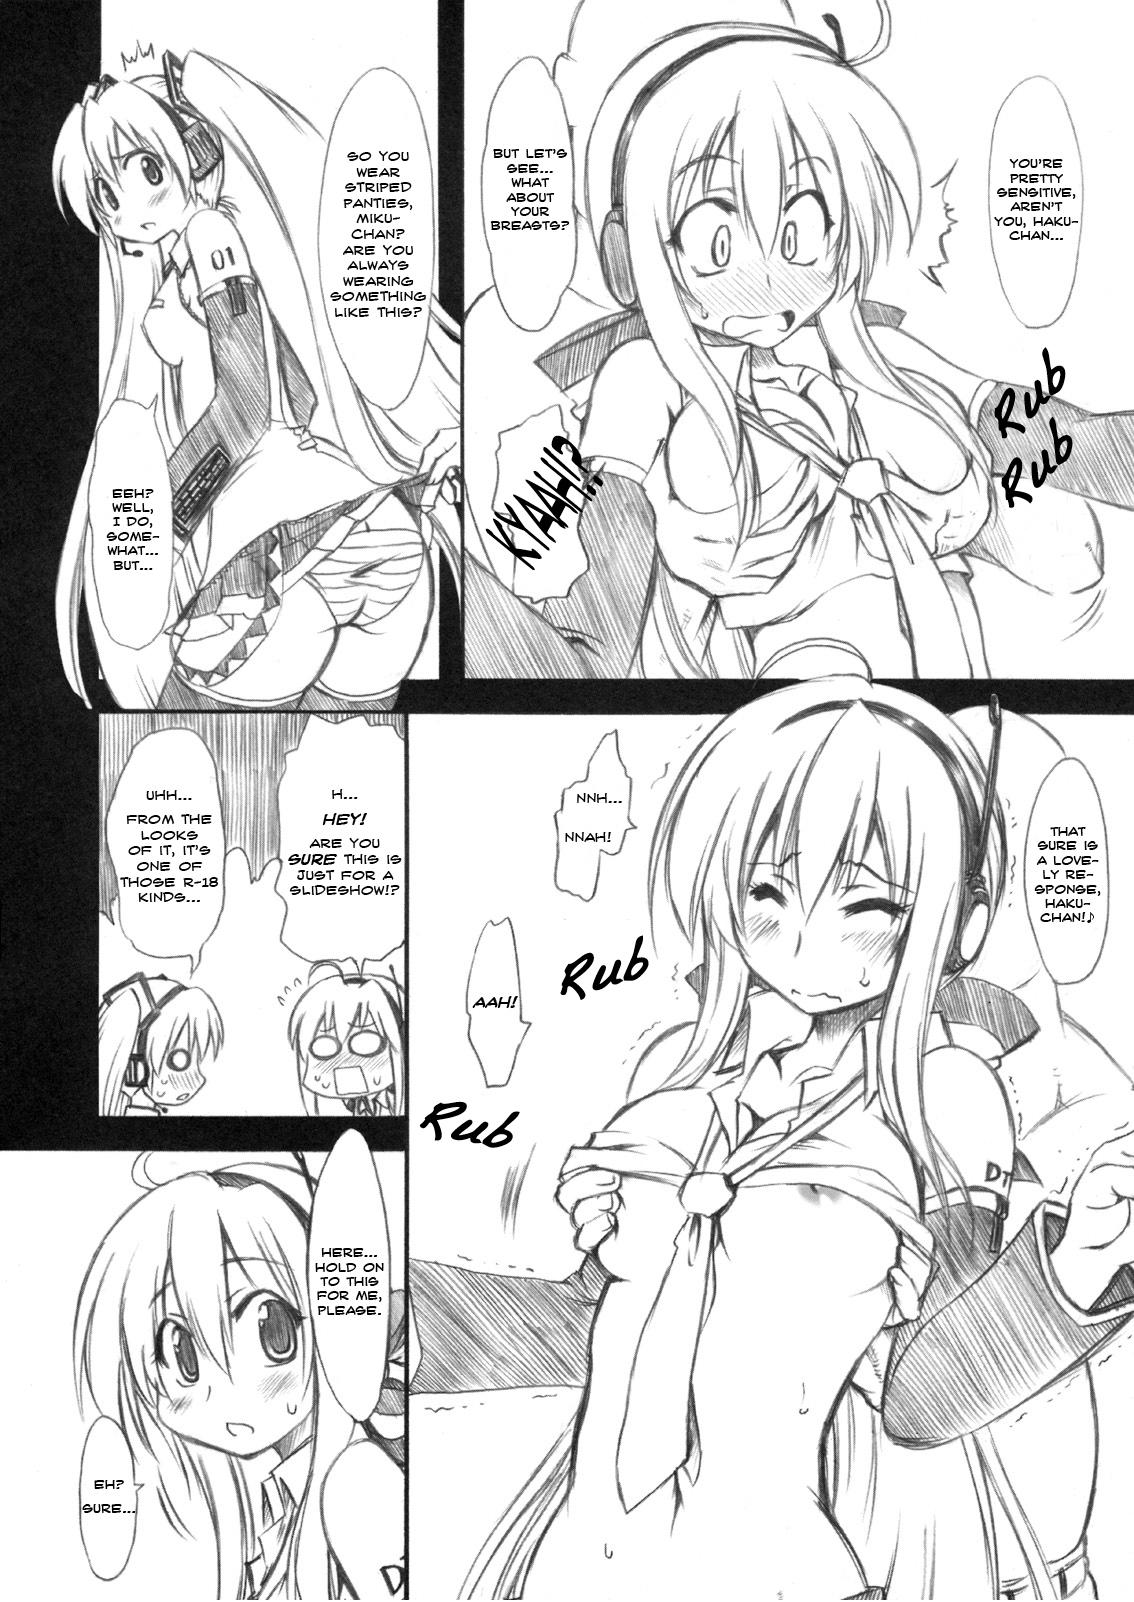 Maduro Sweet Room | Chic & Room - Vocaloid Bj - Page 7